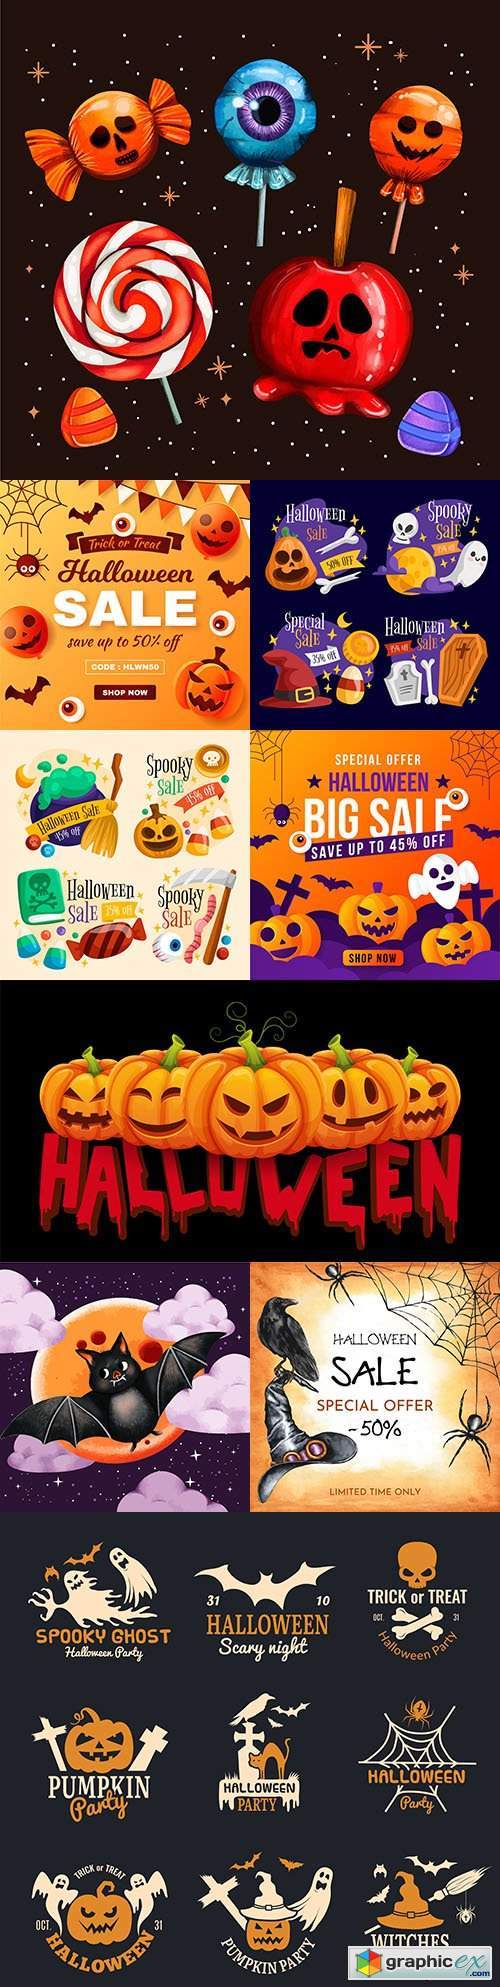 Happy Halloween holiday banner illustration collection 4